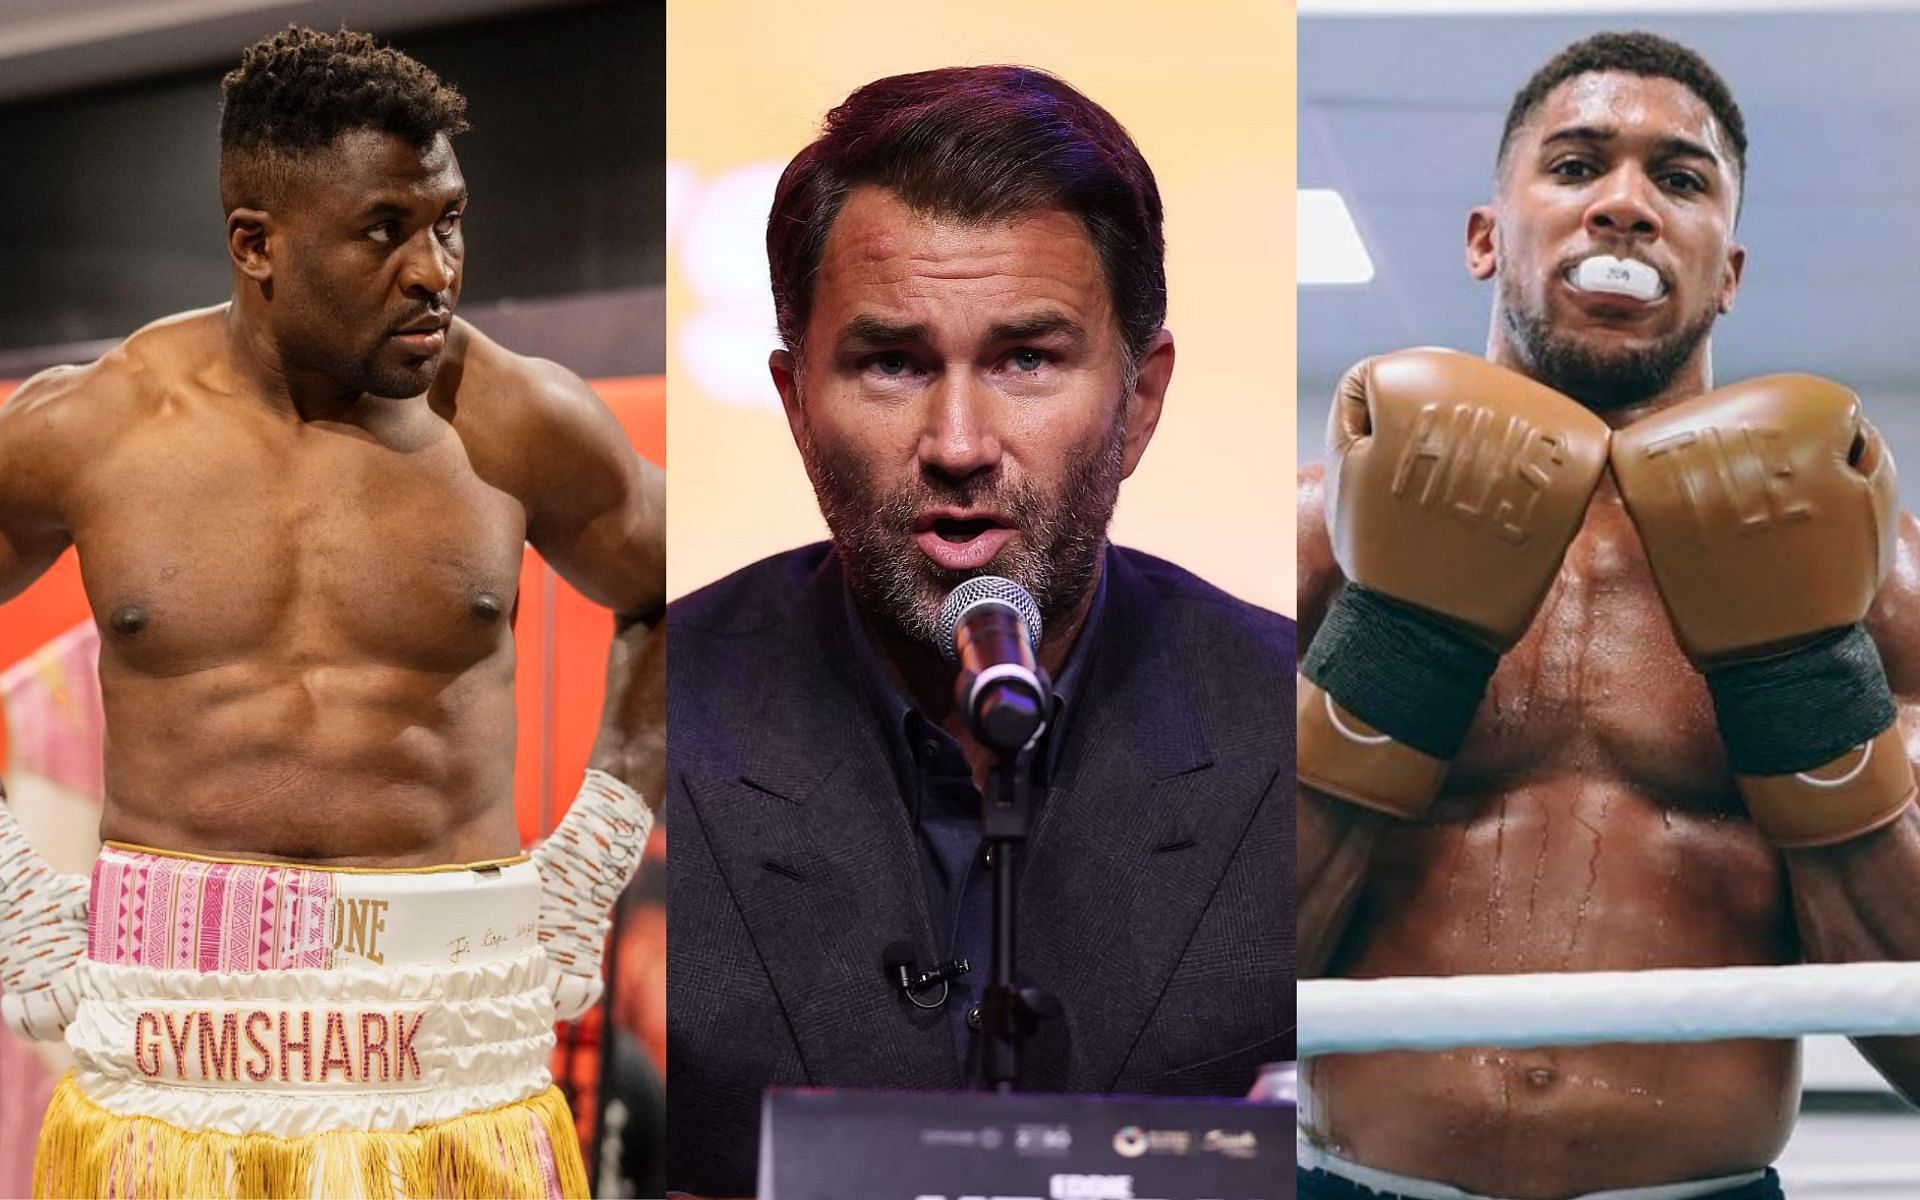 Eddie Hearn (middle) left unimpressed with Francis Ngannou (left) for his accusations of foul play against him and Anthony Joshua (right) [Images Courtesy: @GettyImages, @francisngannou and @anthonyjoshua on Instagram]